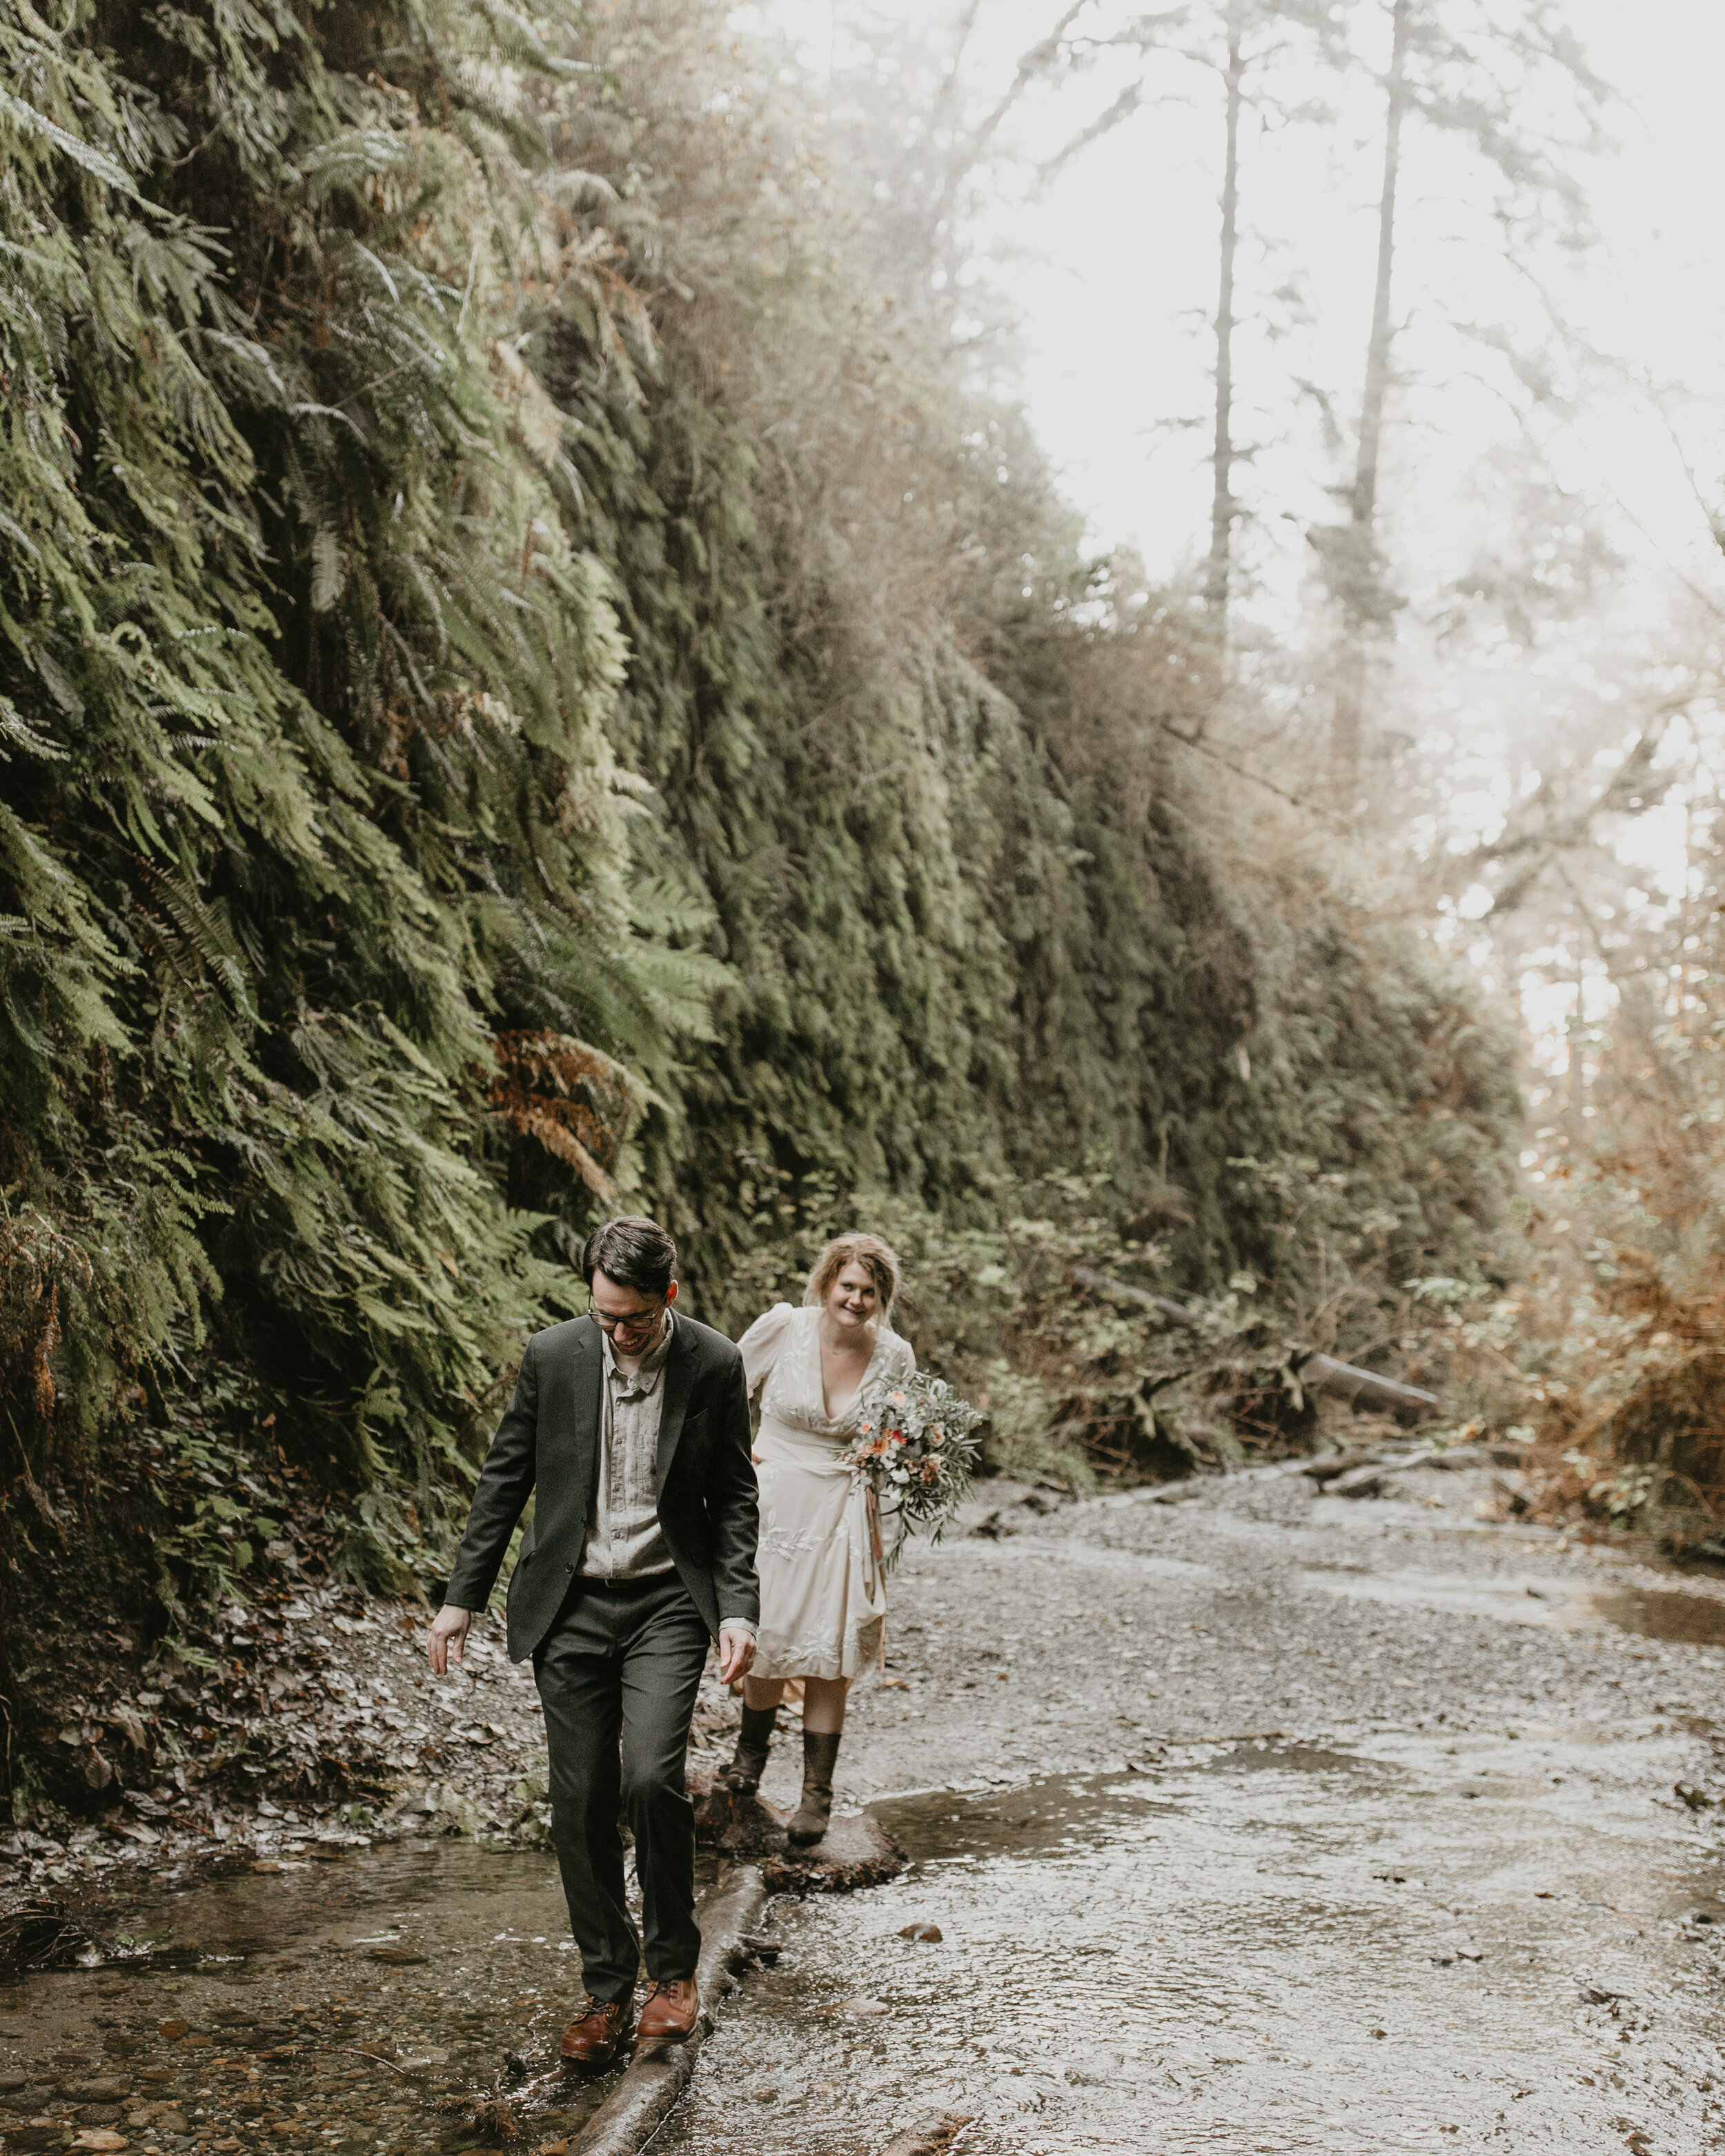 nicole-daacke-photography-redwood-forest-elopement-in-northern-california-patricks-point-coast-adventure-elopement-photography-redwoods-elopement-photographer-196.jpg